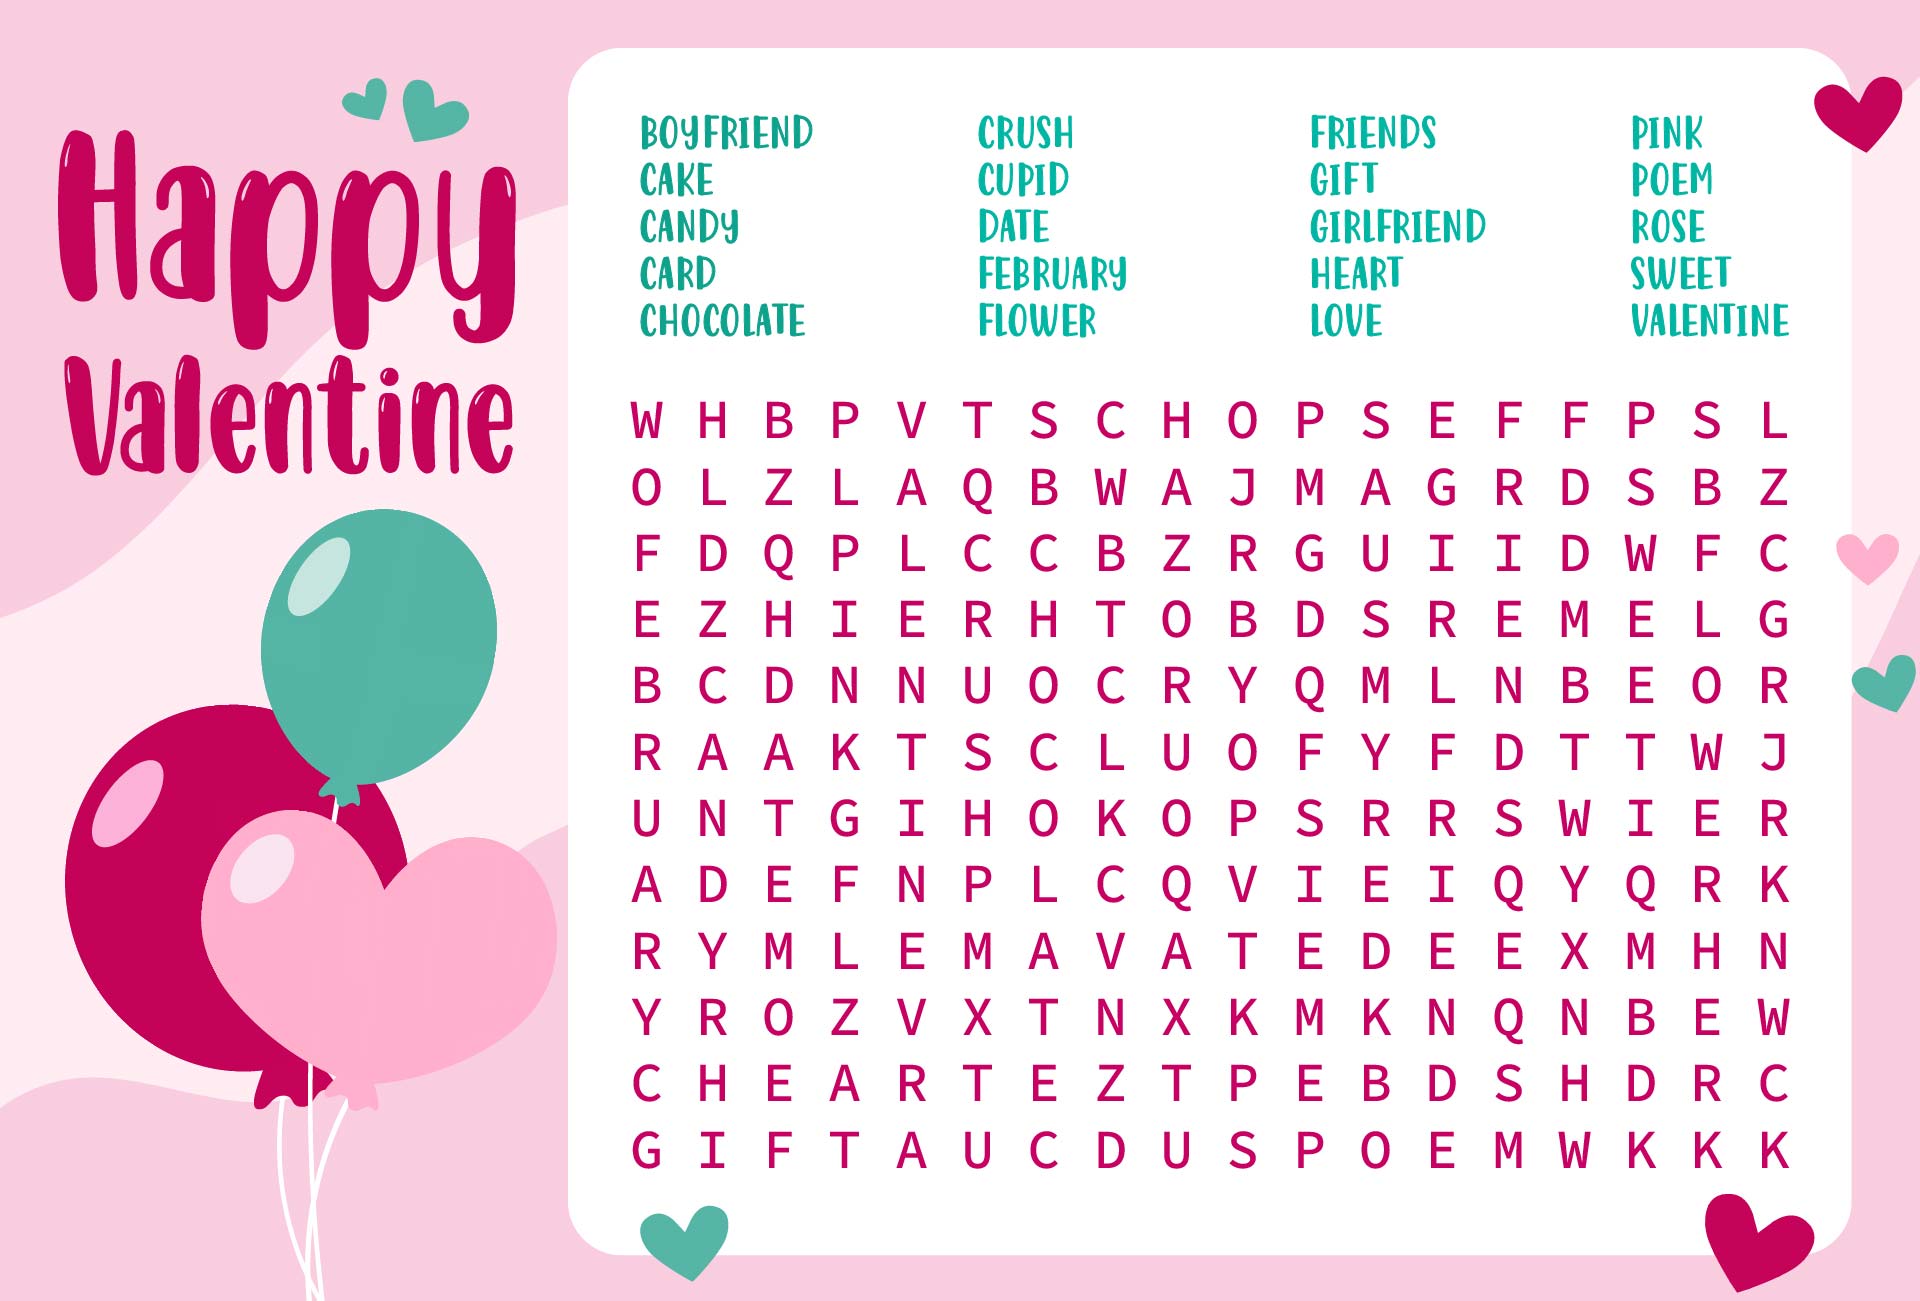 Printable Valentines Day Word Search